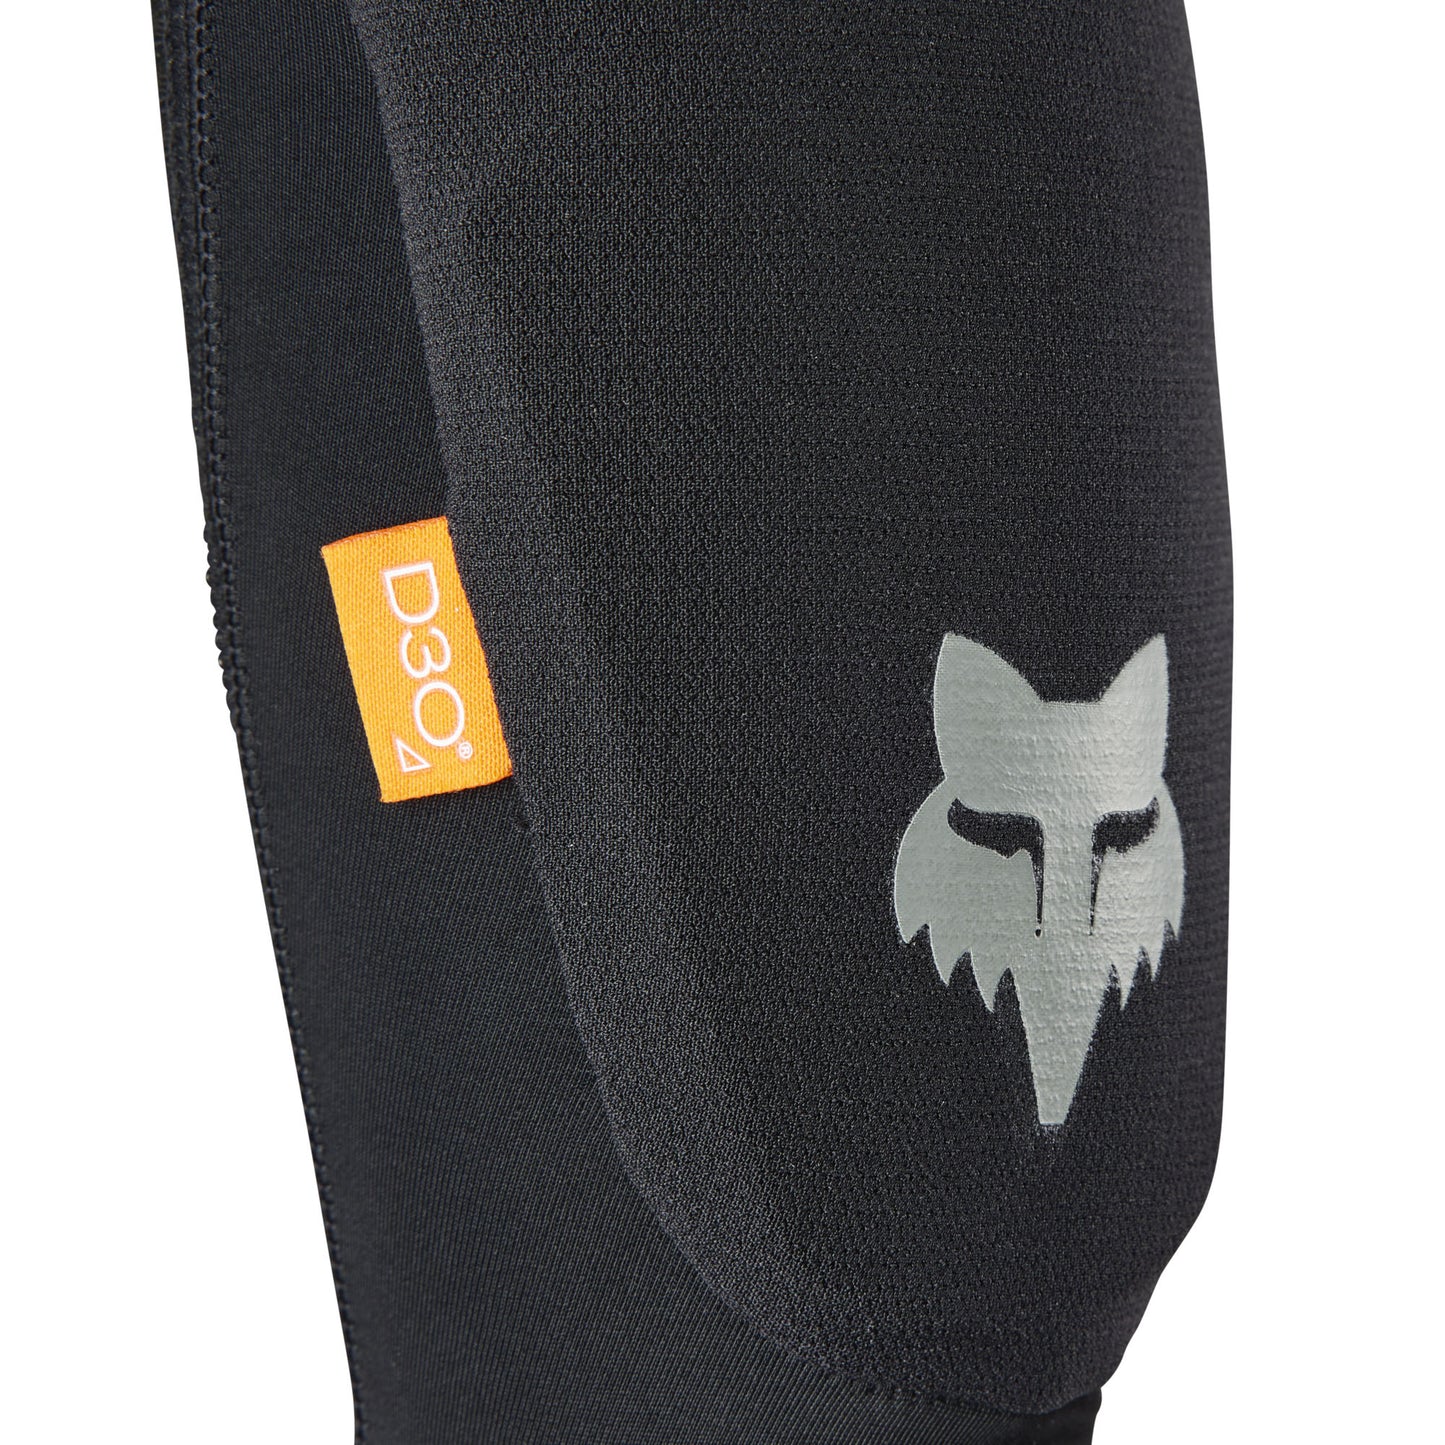 Fox Enduro Youth Elbow Sleeve - Youth - One Size Fits Most - Black